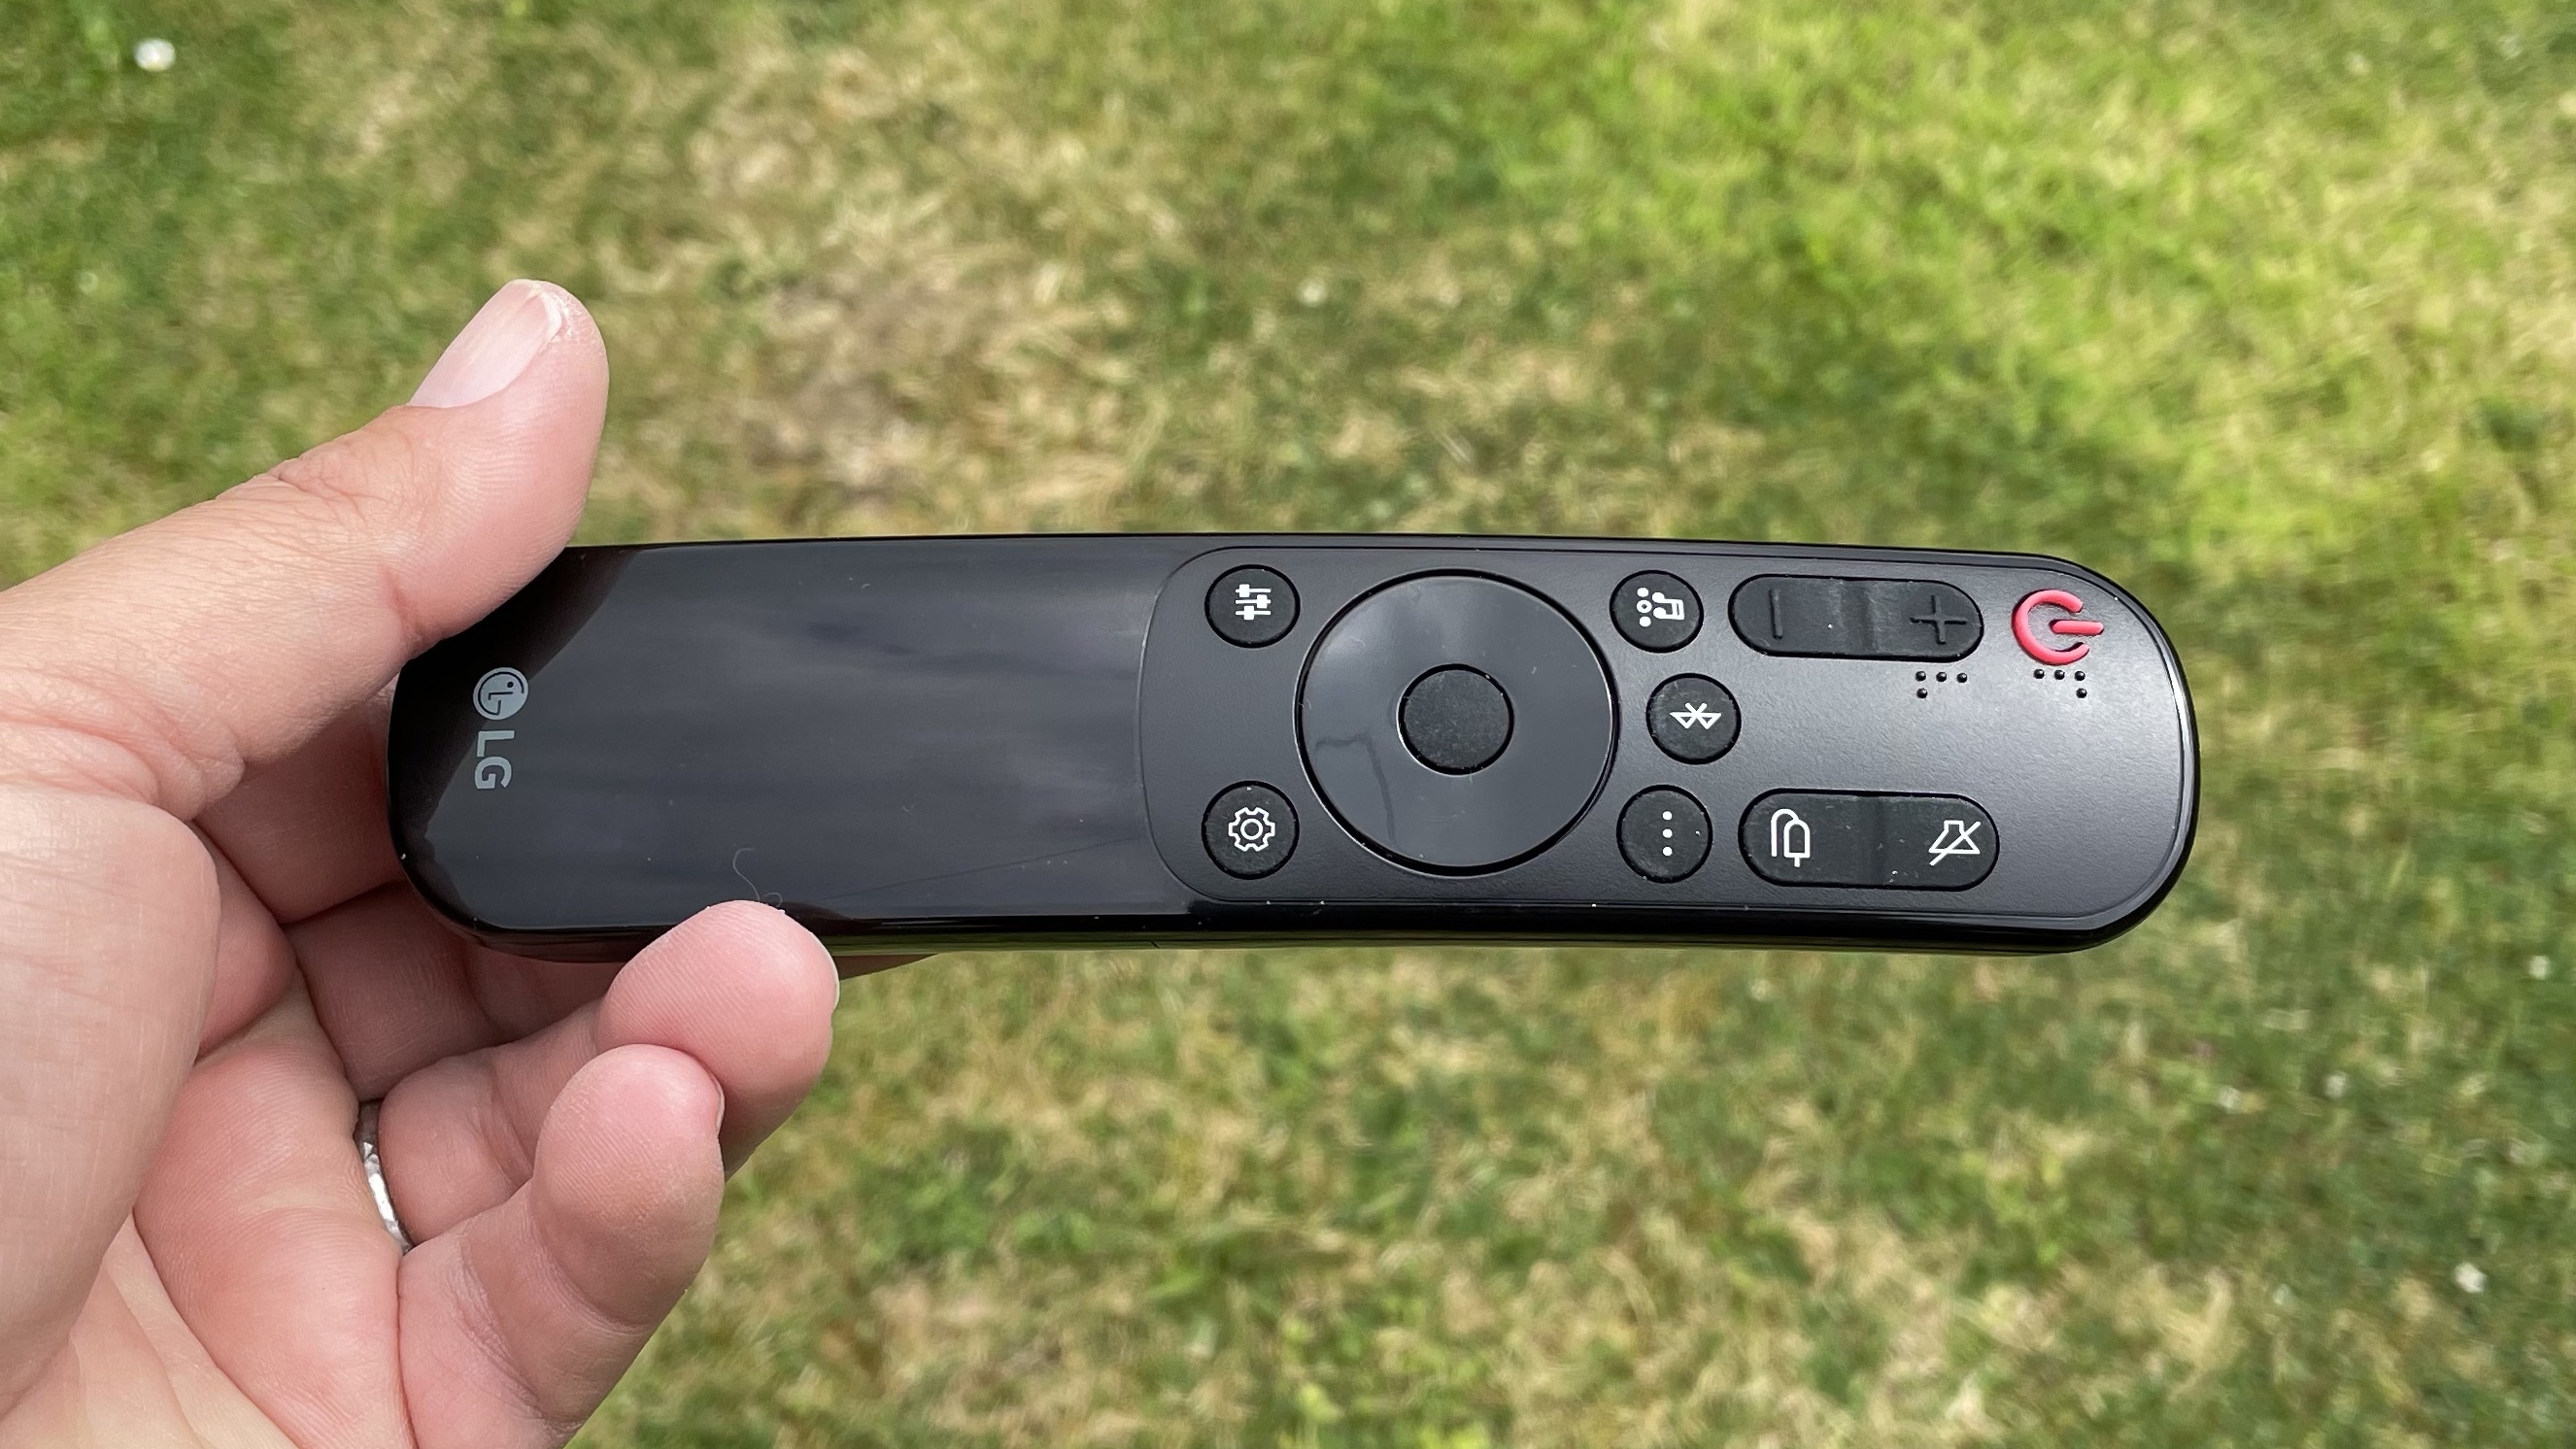 the remote control that comes with the lg sp11ra soundbar